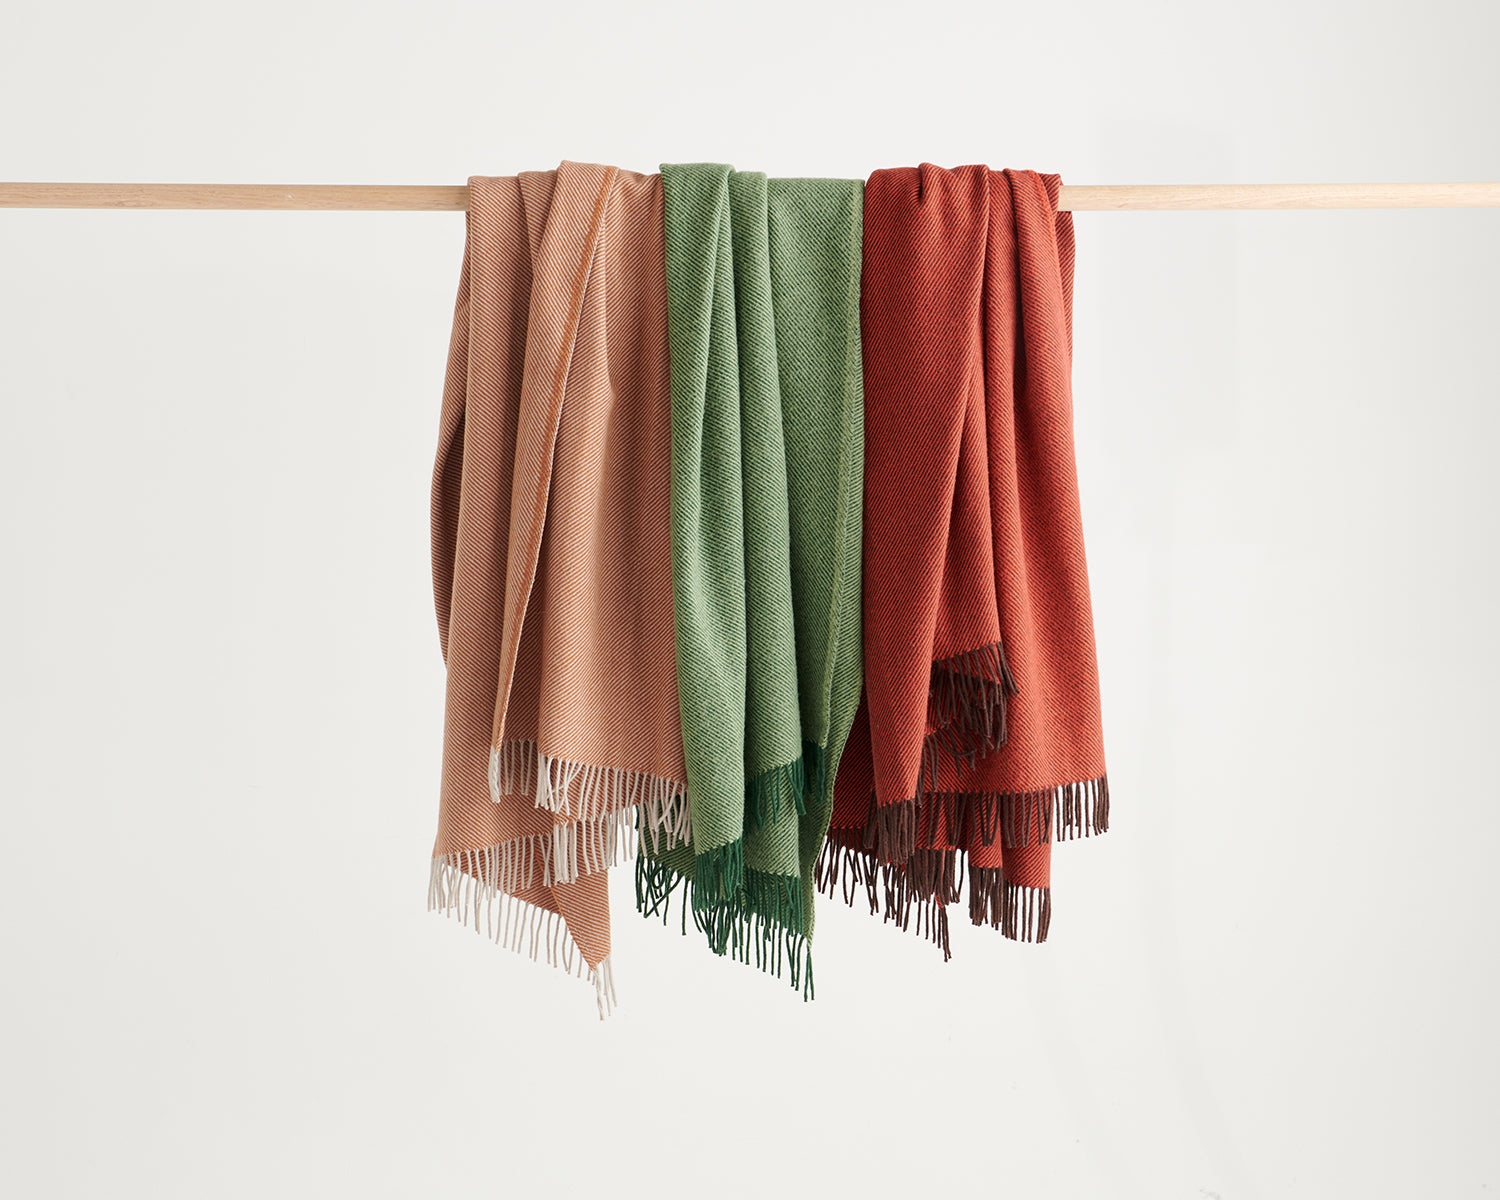 Three diagonal throws hanging side by side in terracotta, forest and umber colourways.